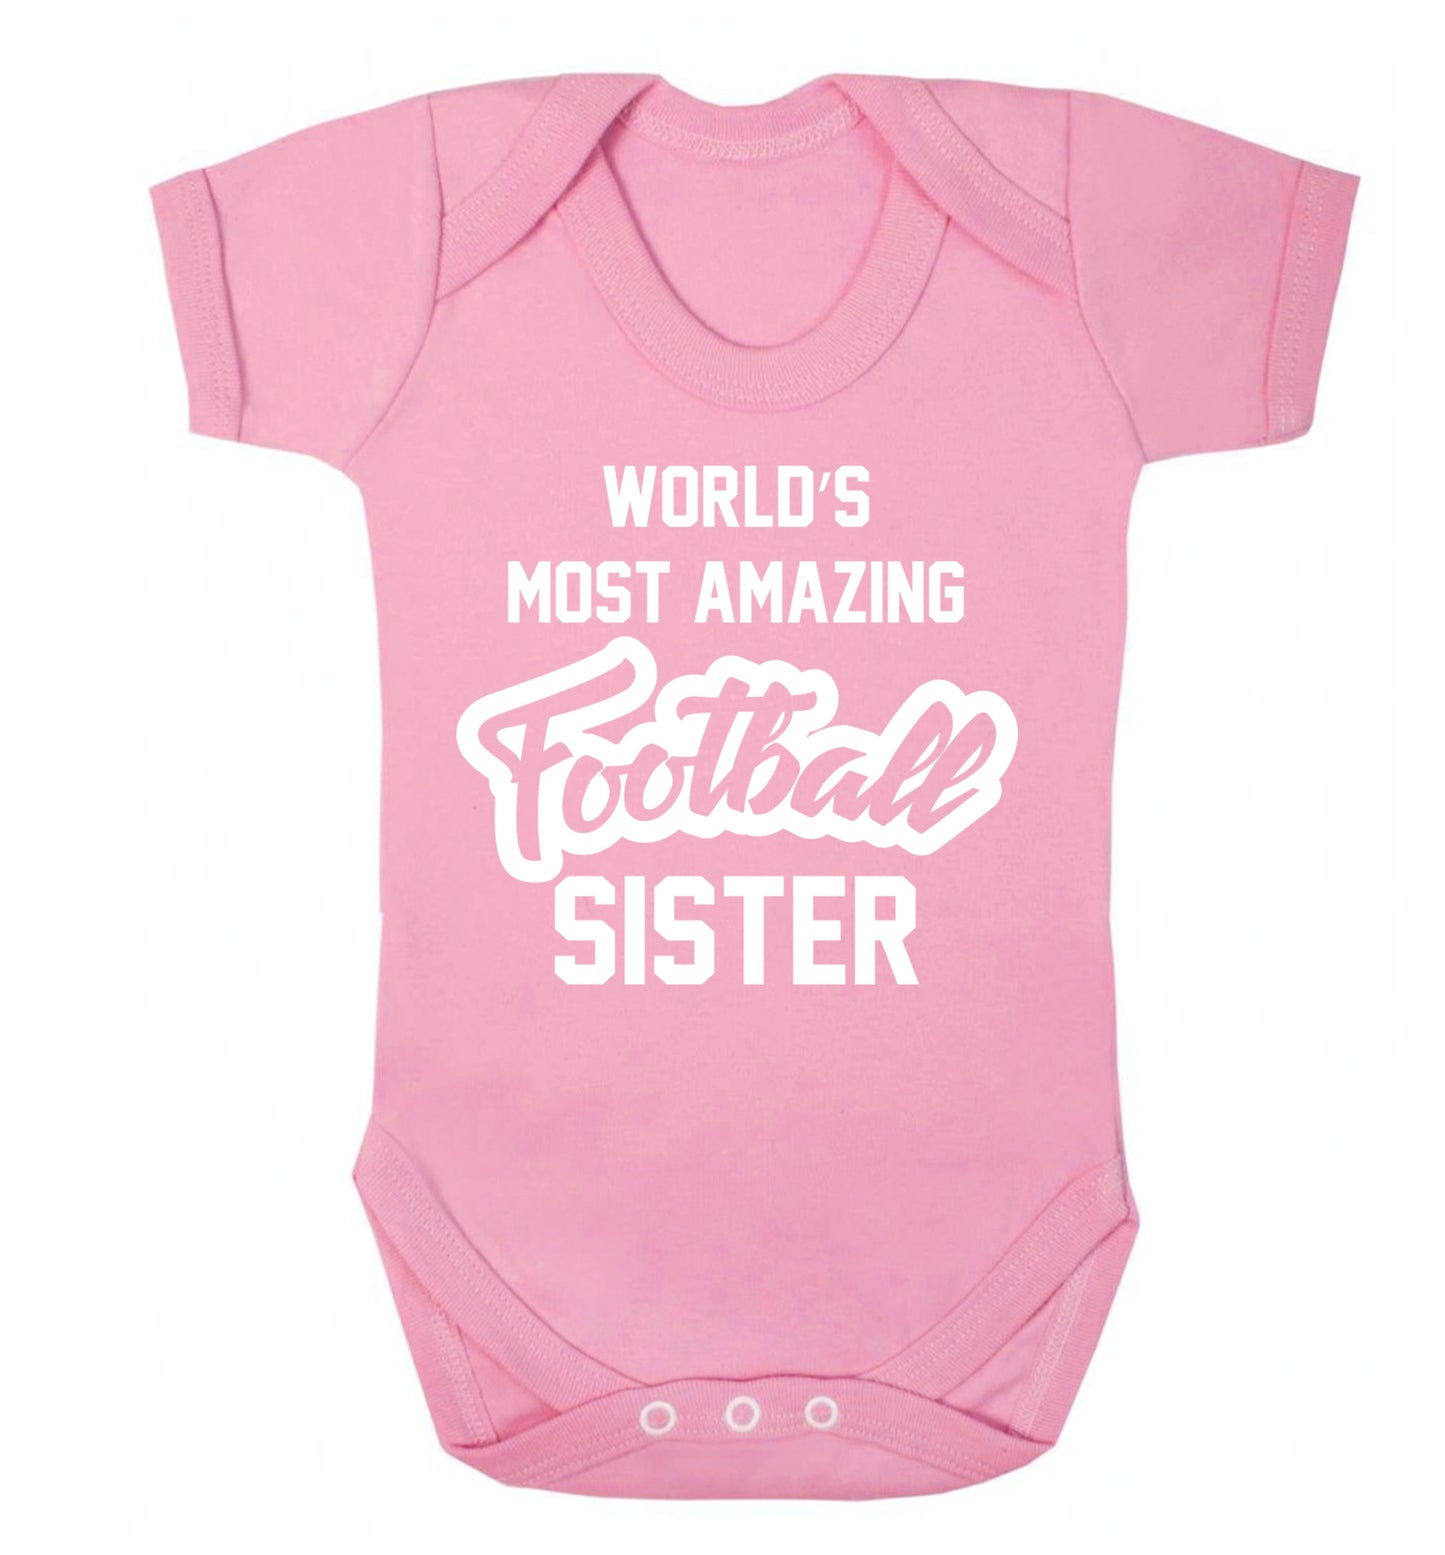 Worlds most amazing football sister Baby Vest pale pink 18-24 months